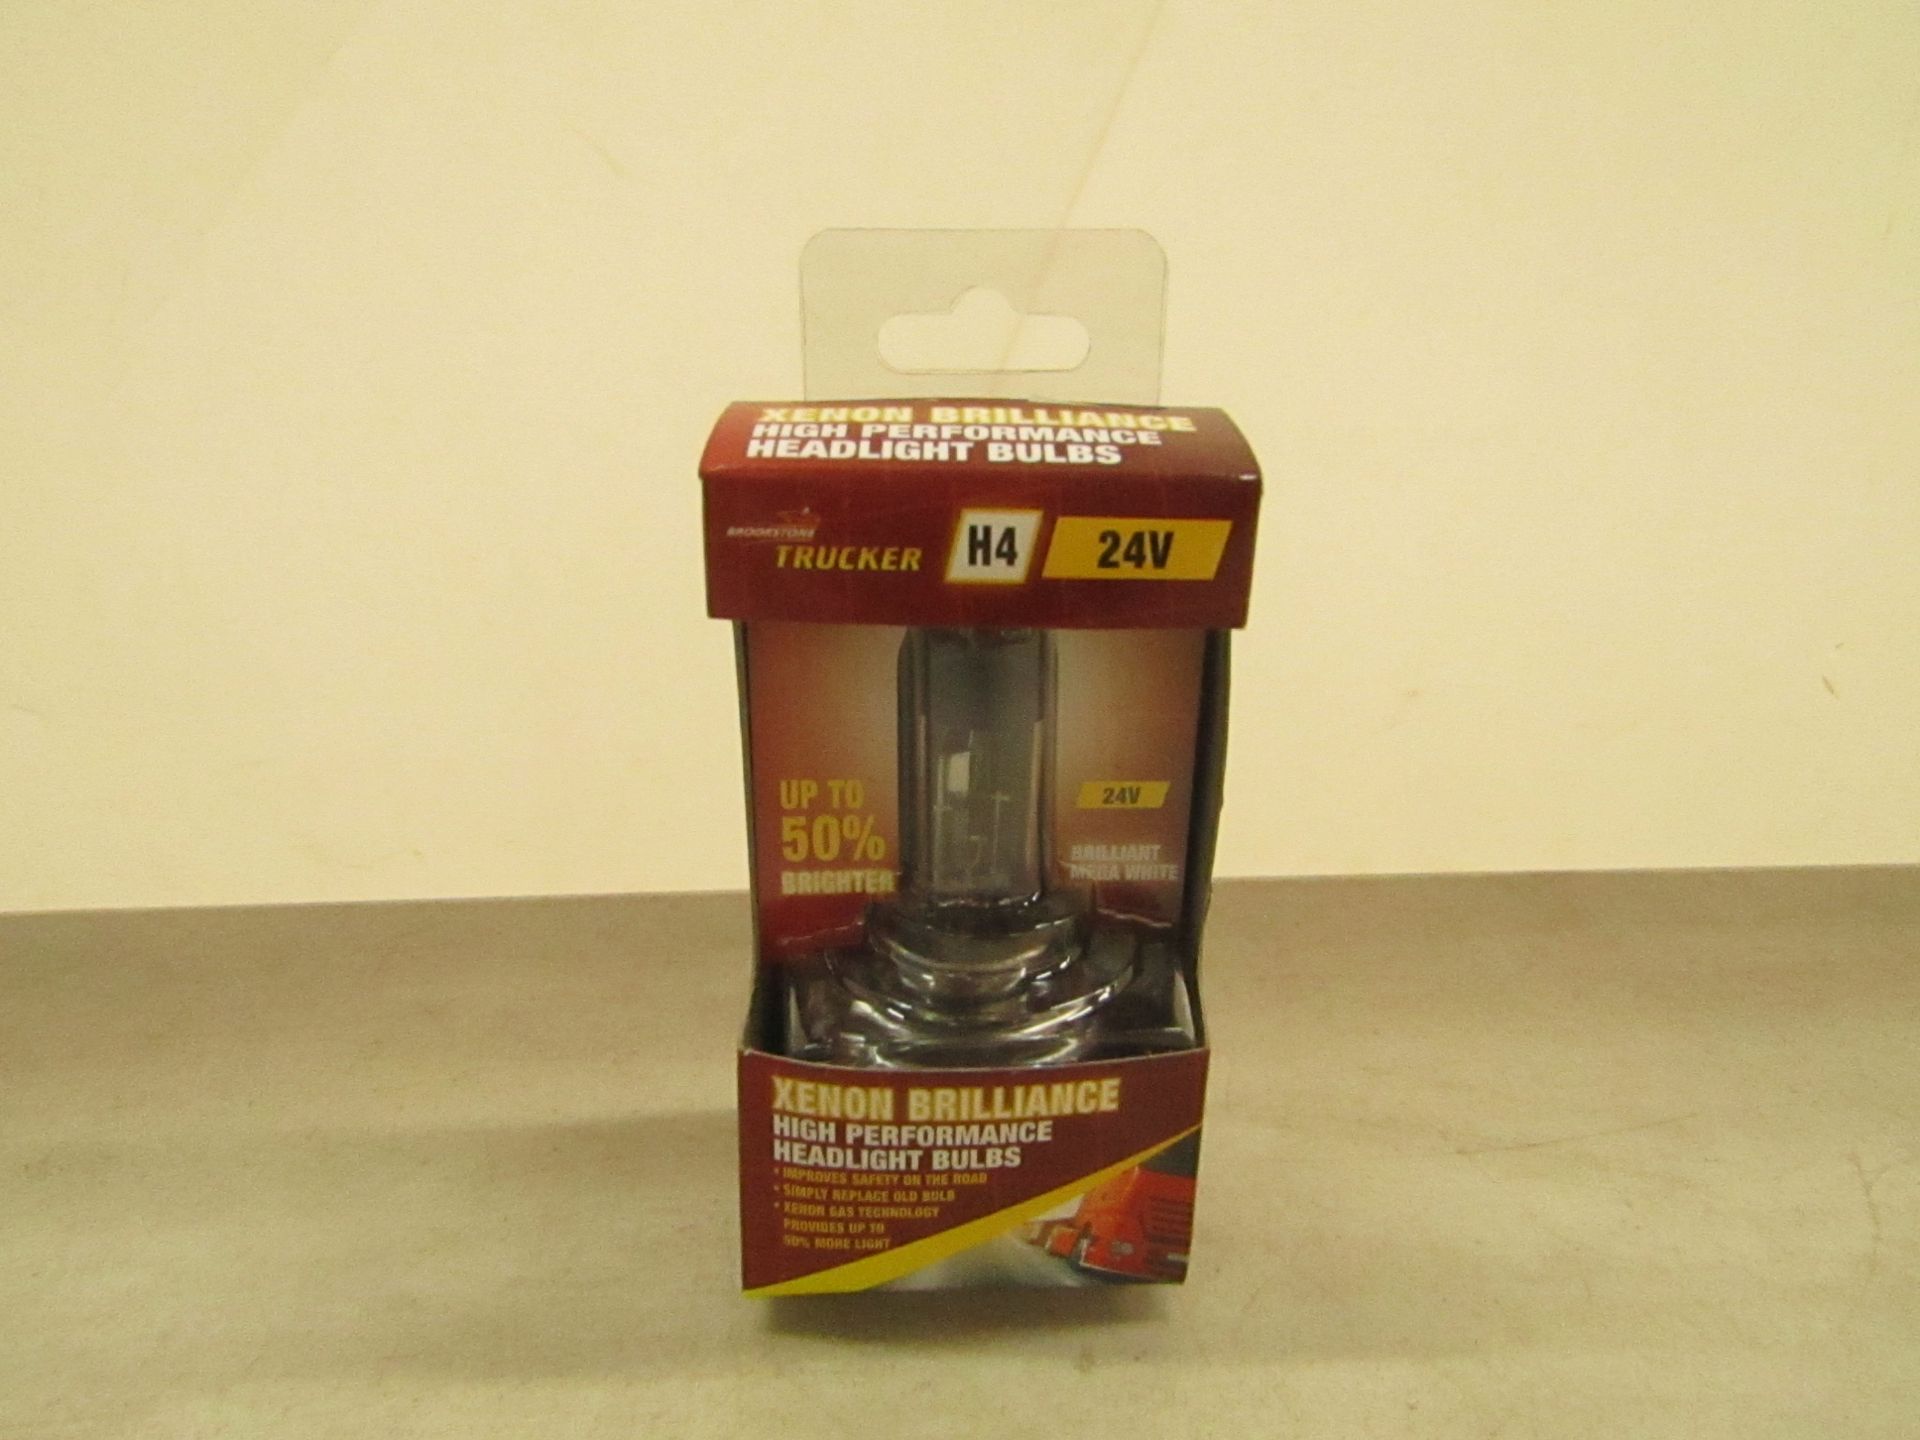 5x Brookstone 24v H4 Xenon headlight bulbs, new and packaged.